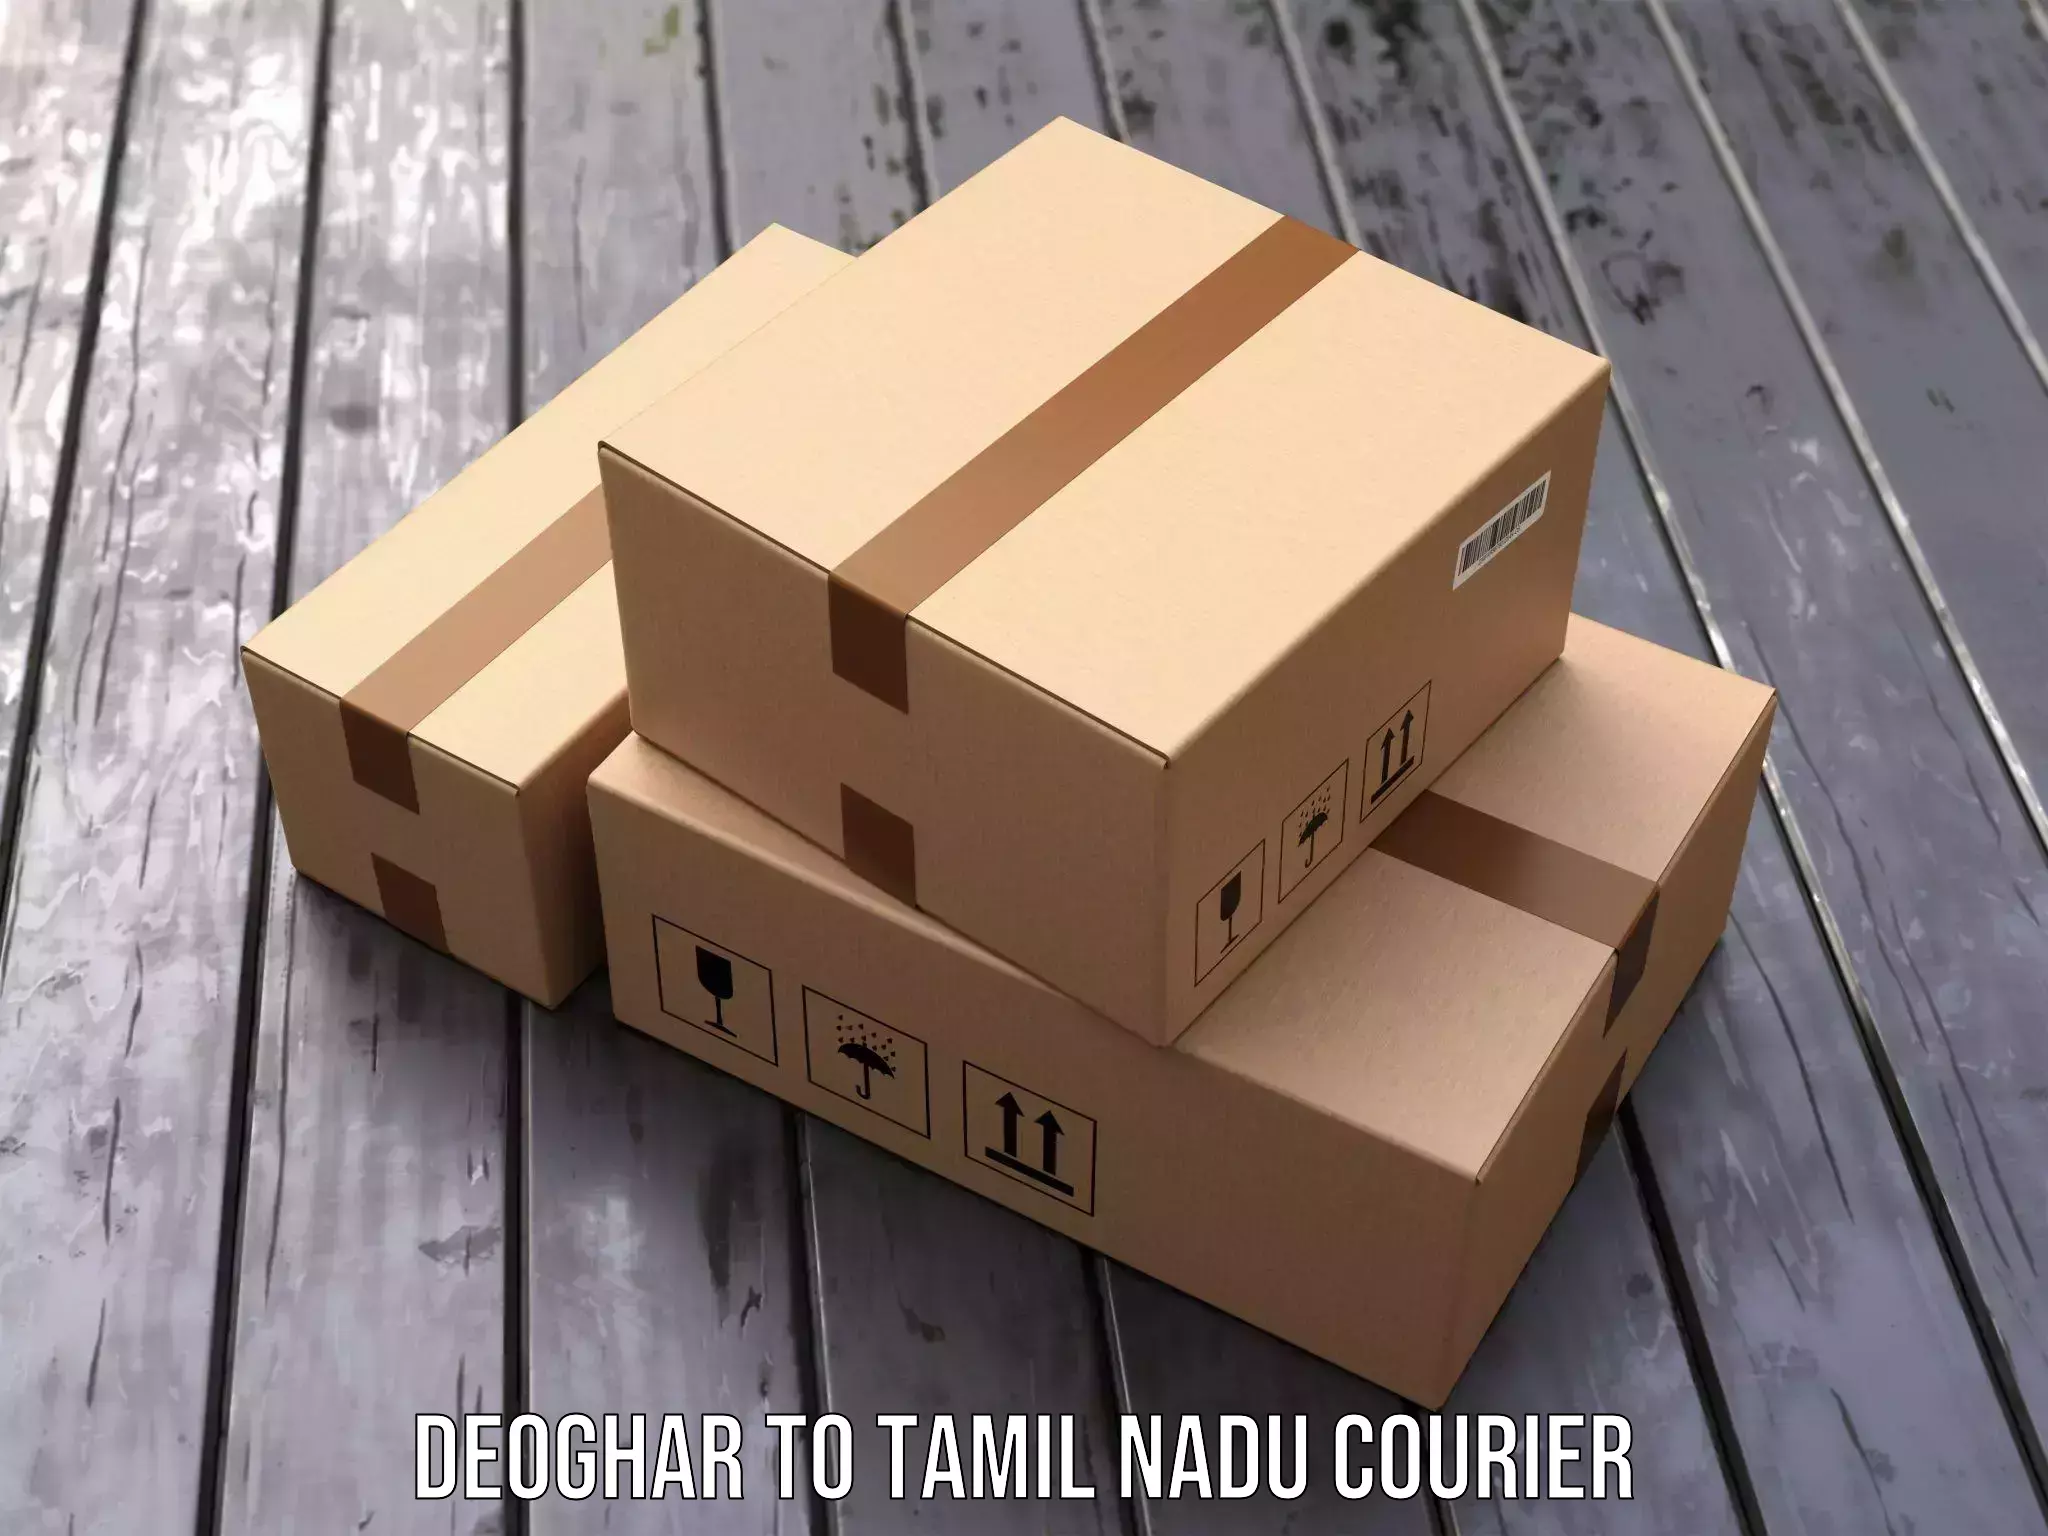 State-of-the-art courier technology Deoghar to Harur